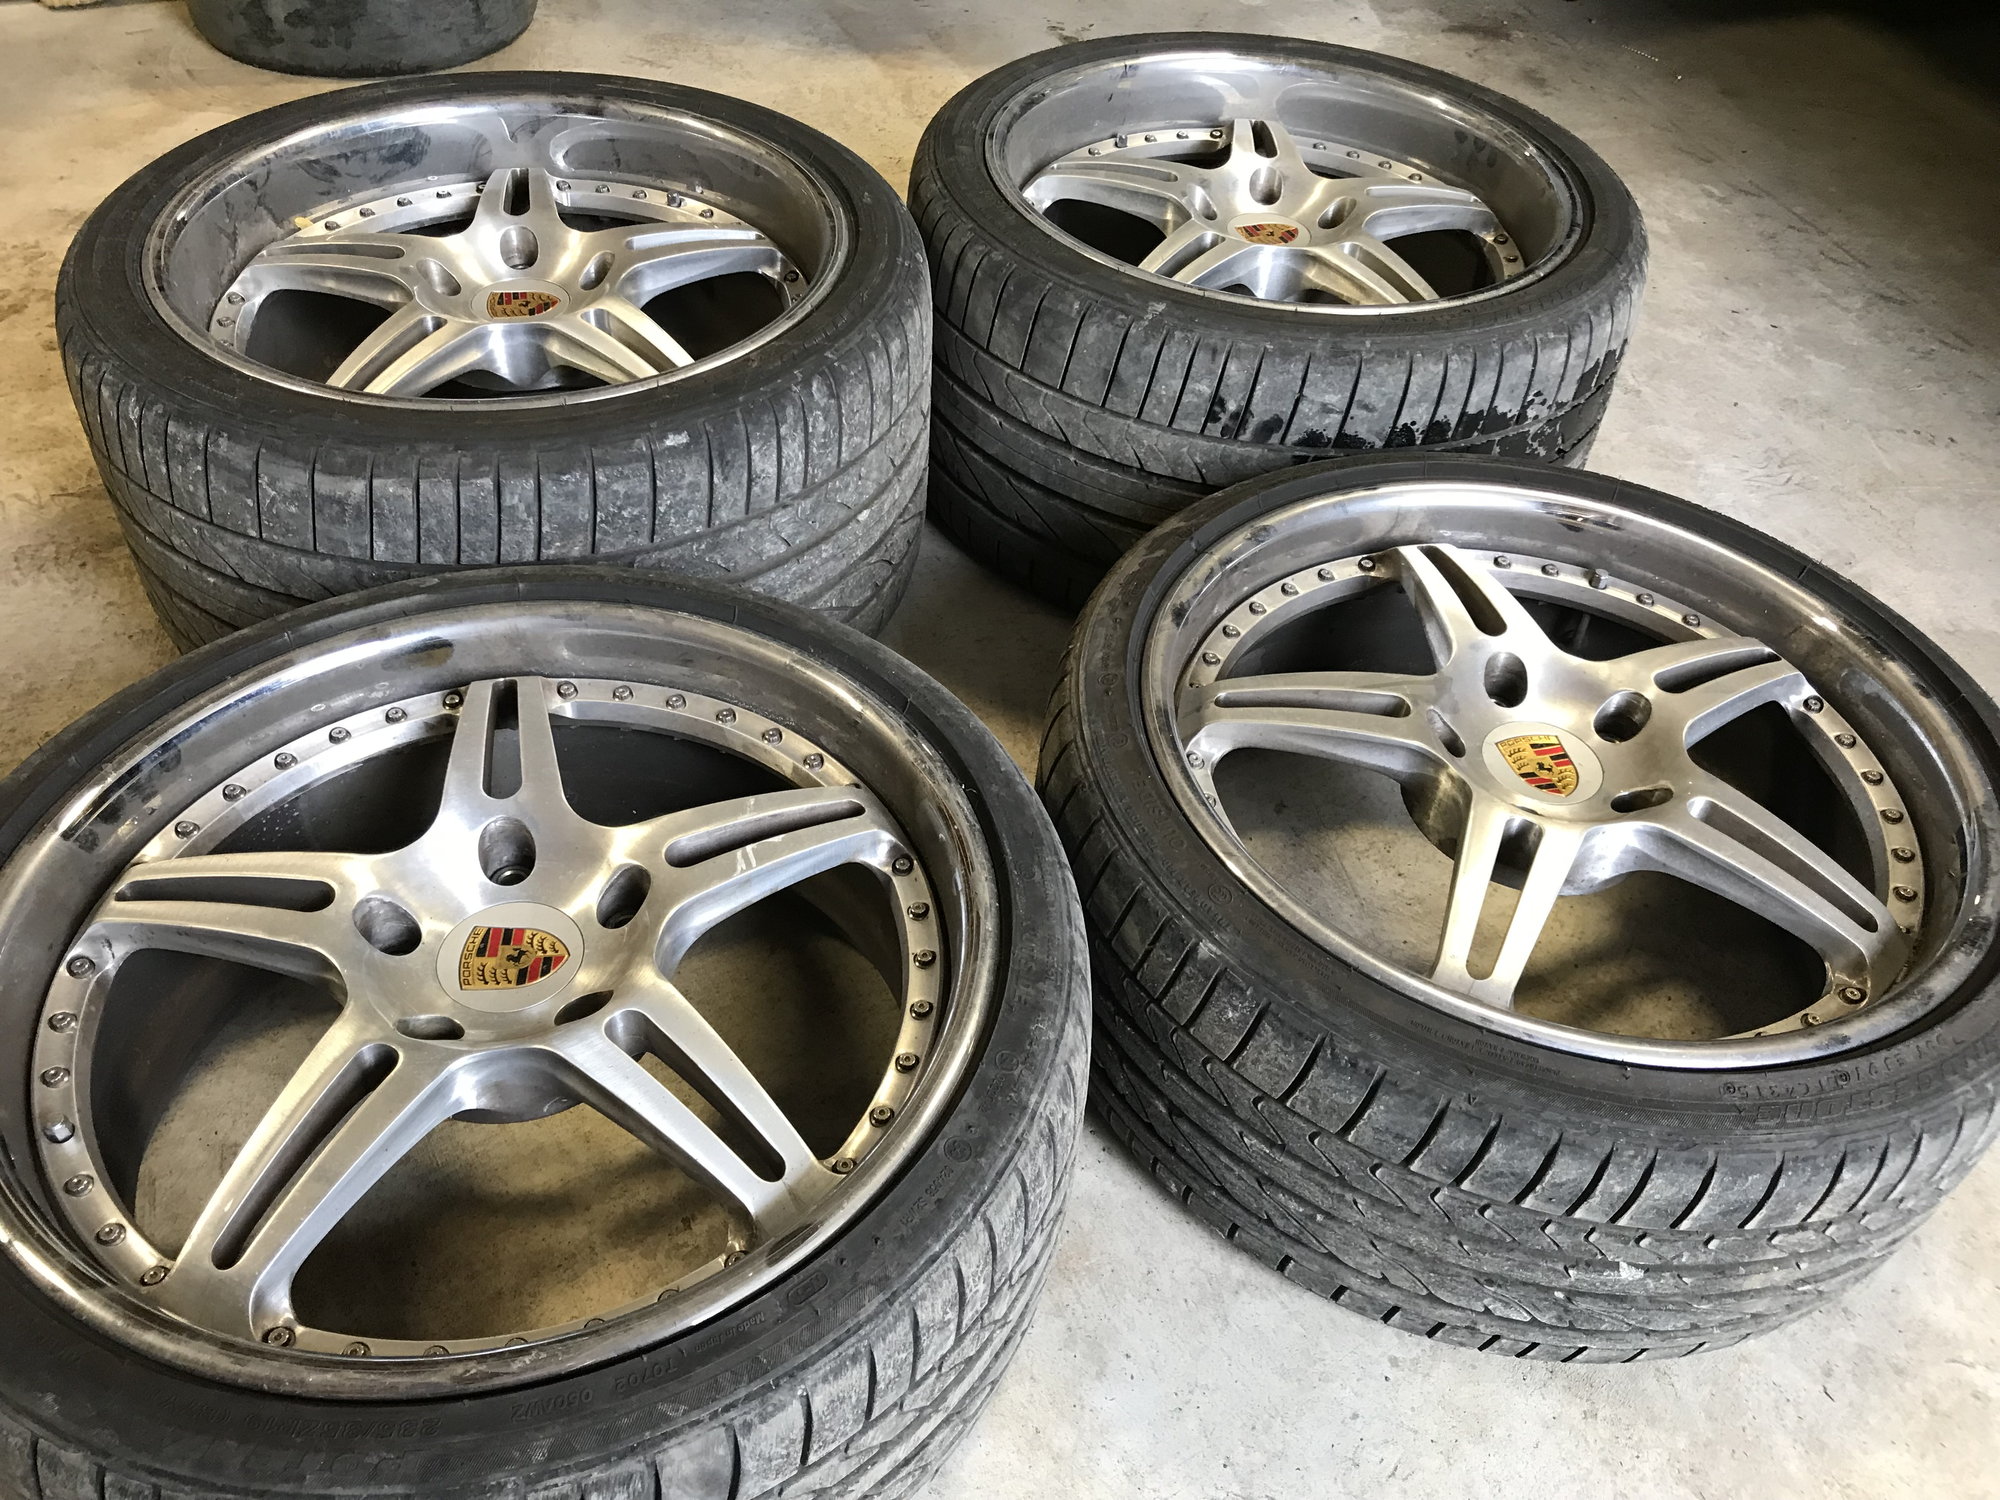 Wheels and Tires/Axles - 19" Staggered HRE 3 Piece Forged Wheels - Used - Mertztown, PA 19539, United States